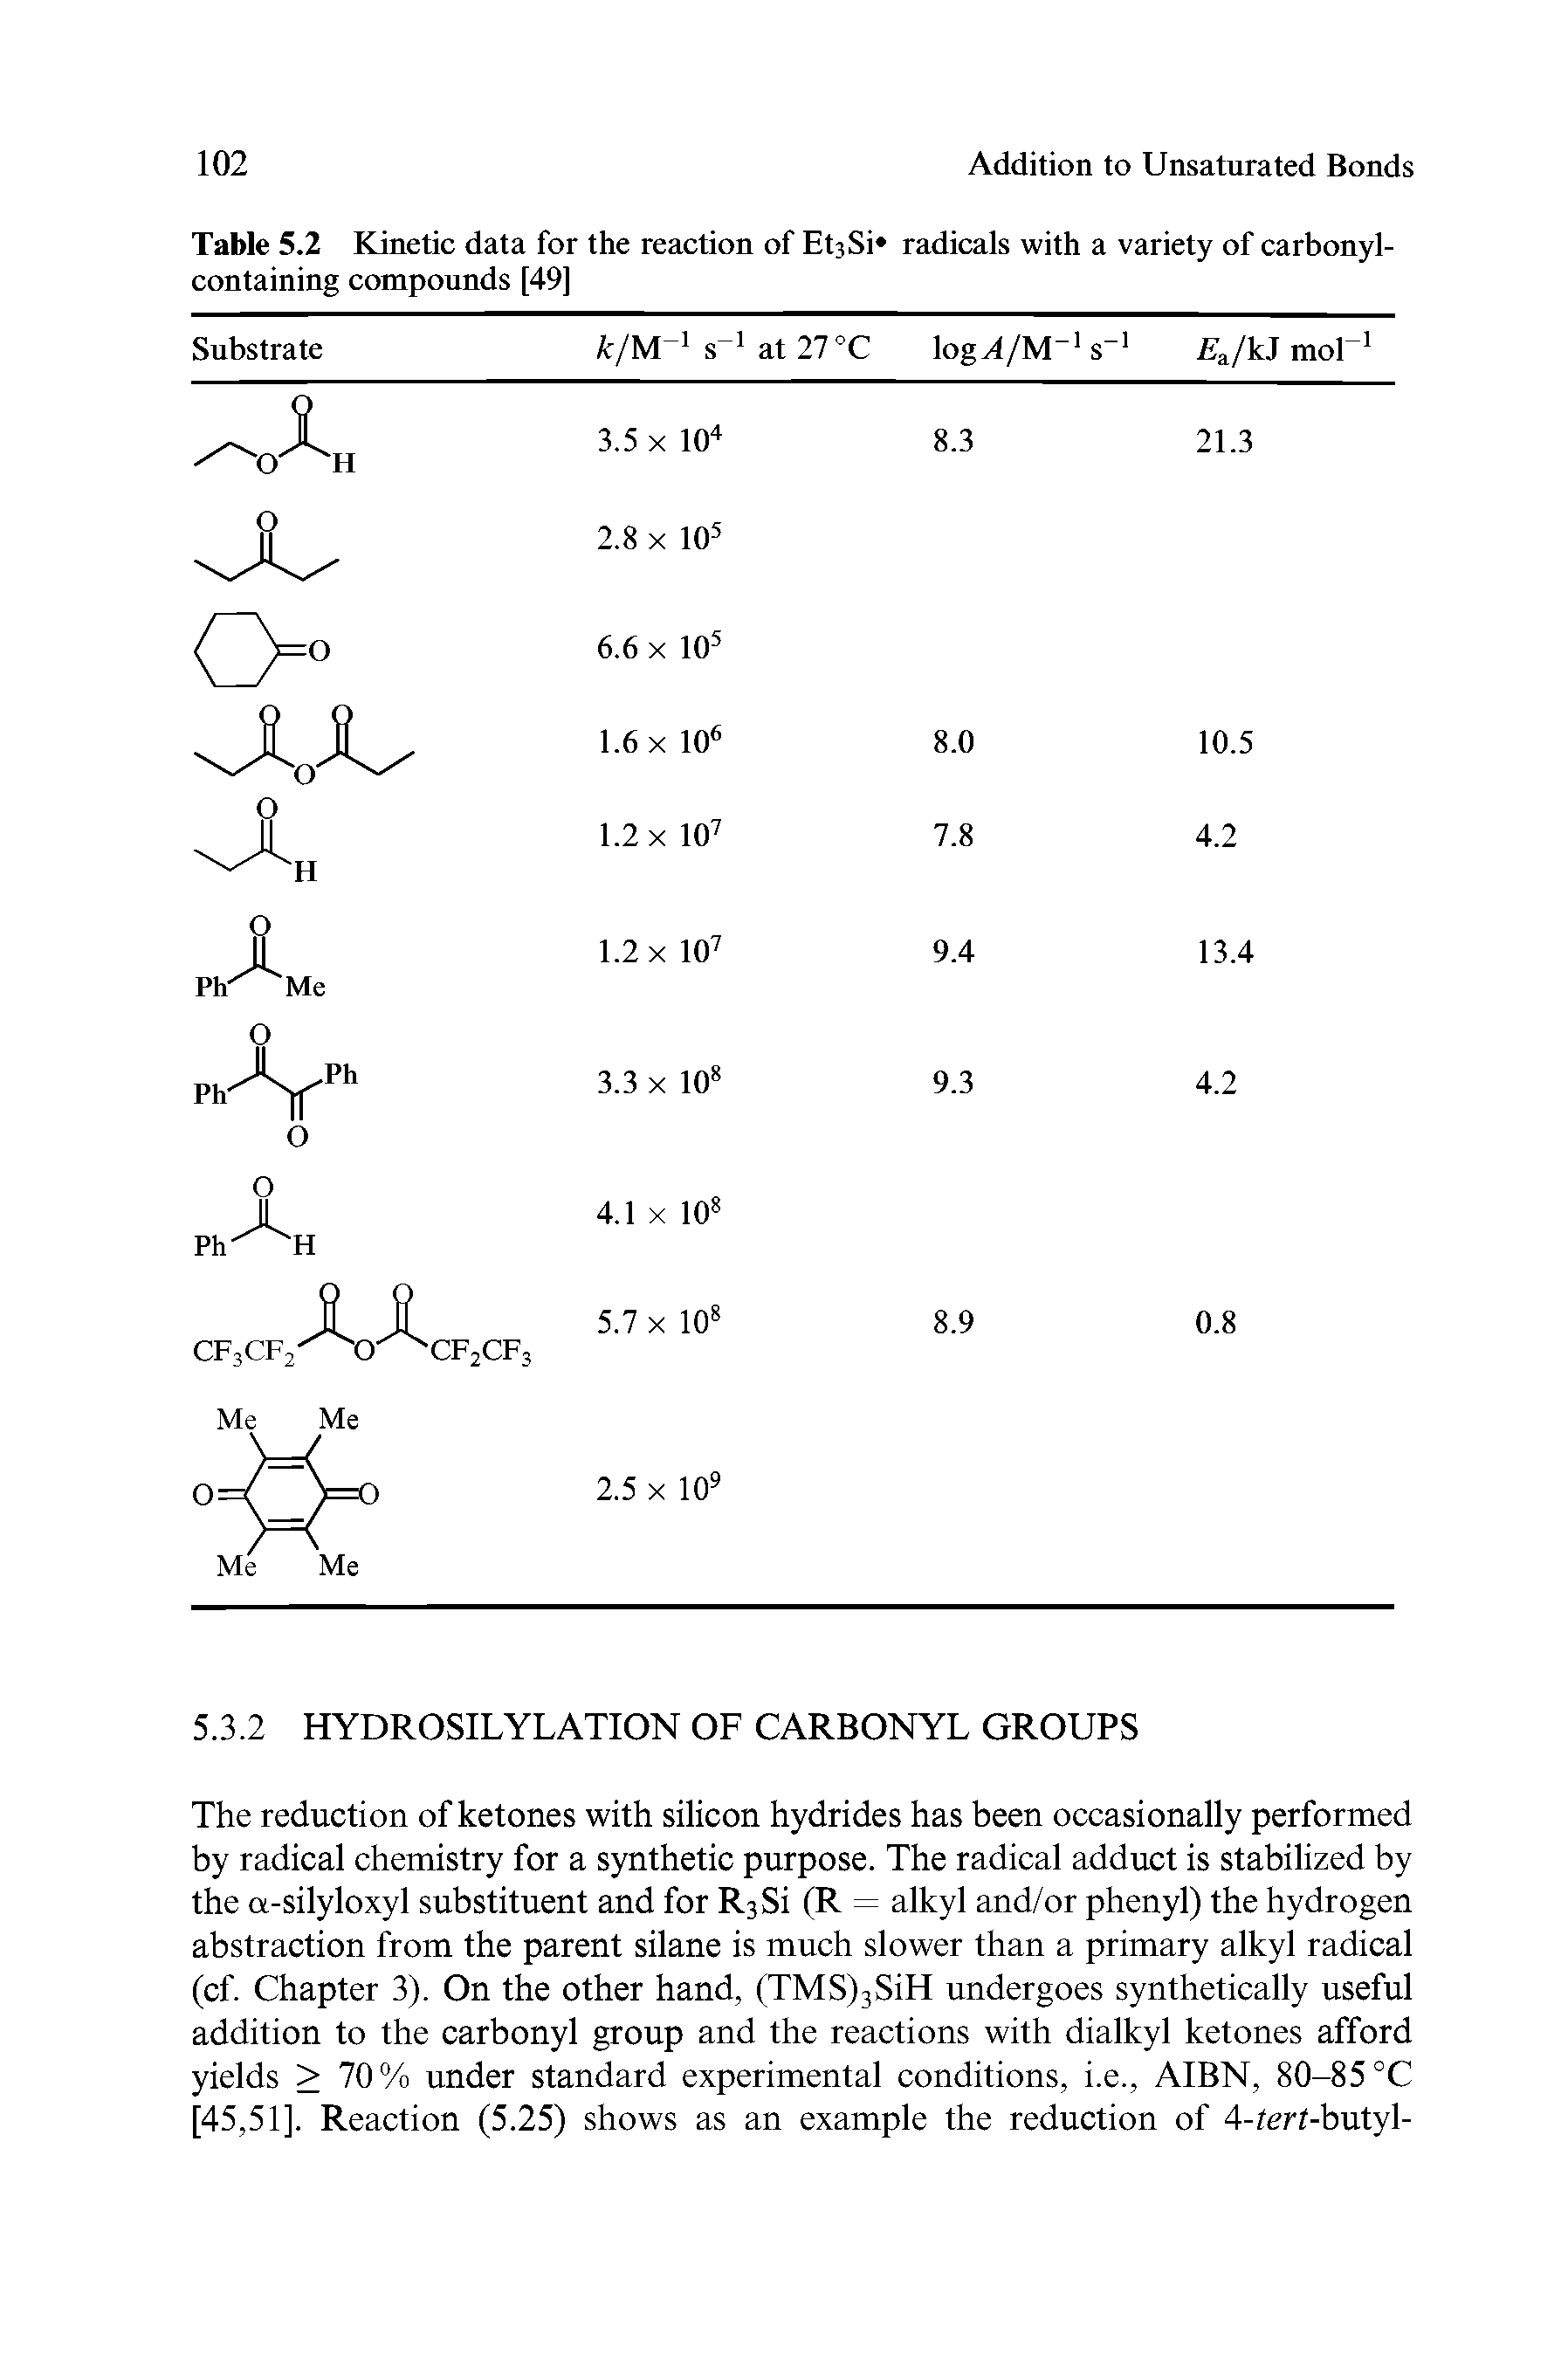 Table 5.2 Kinetic data for the reaction of EtsSi radicals with a variety of carbonyl-containing compounds [49]...